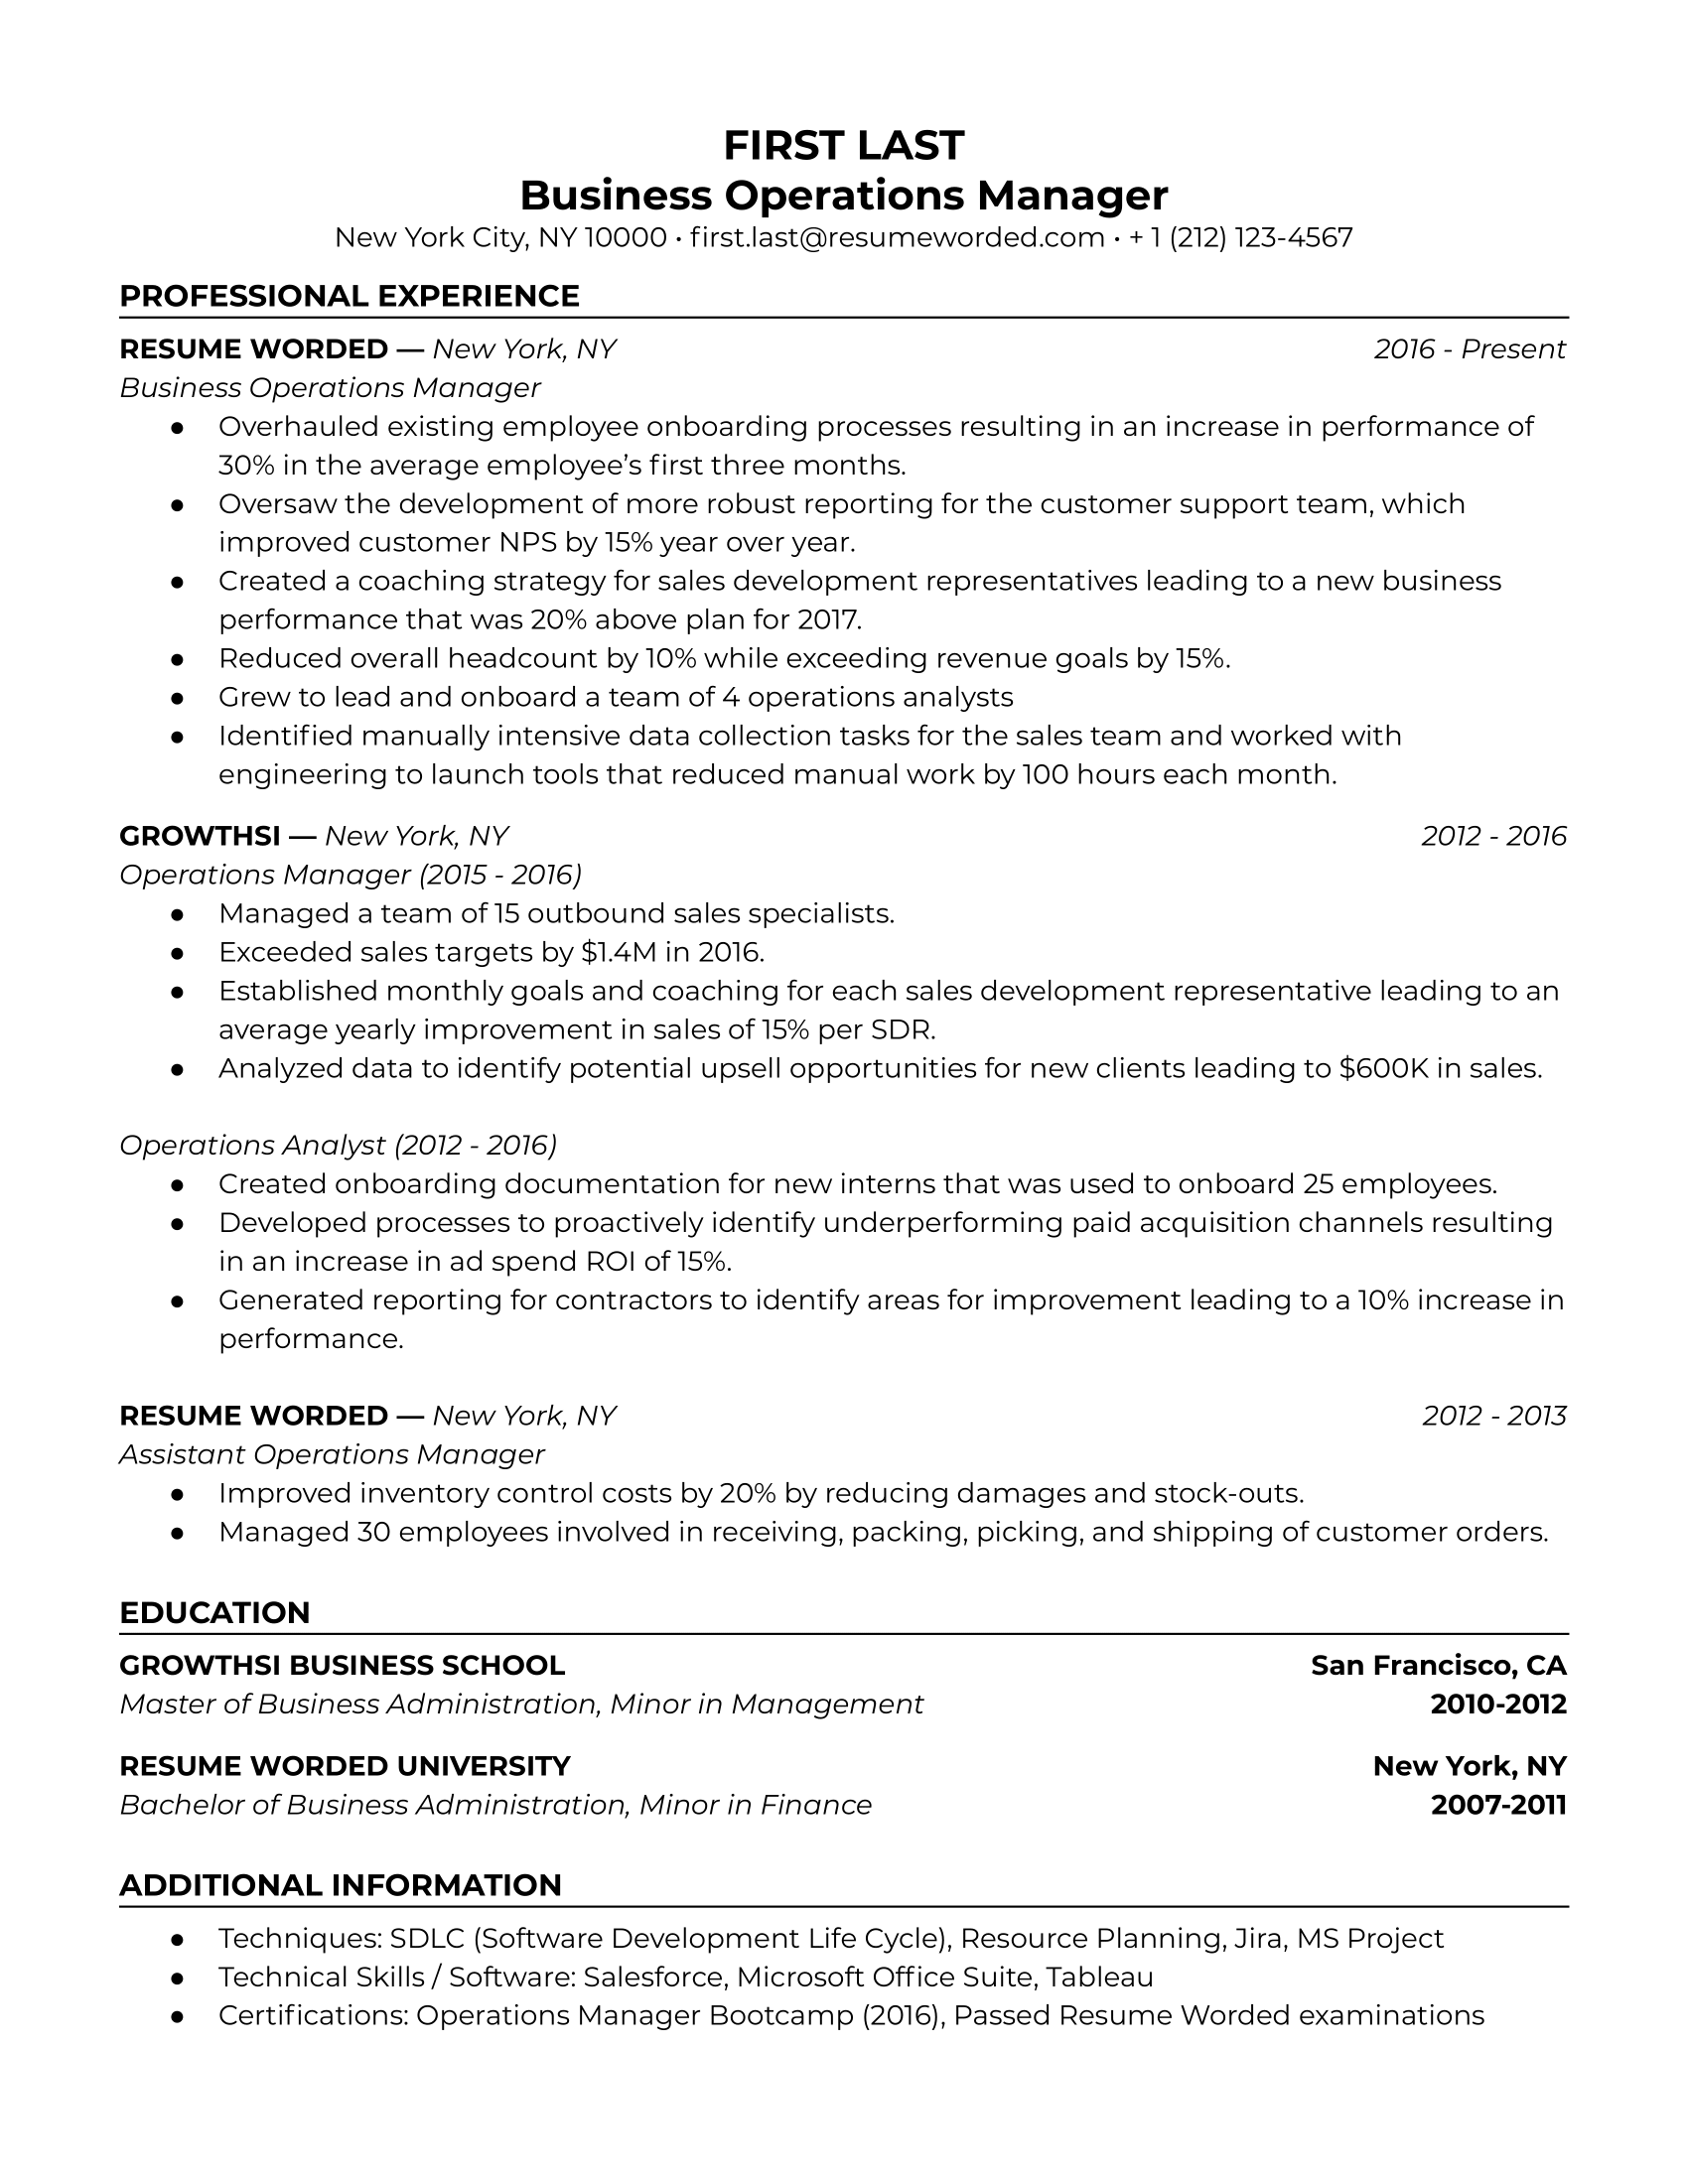 Business operations manager resume with work experience, past promotion, and management skills.